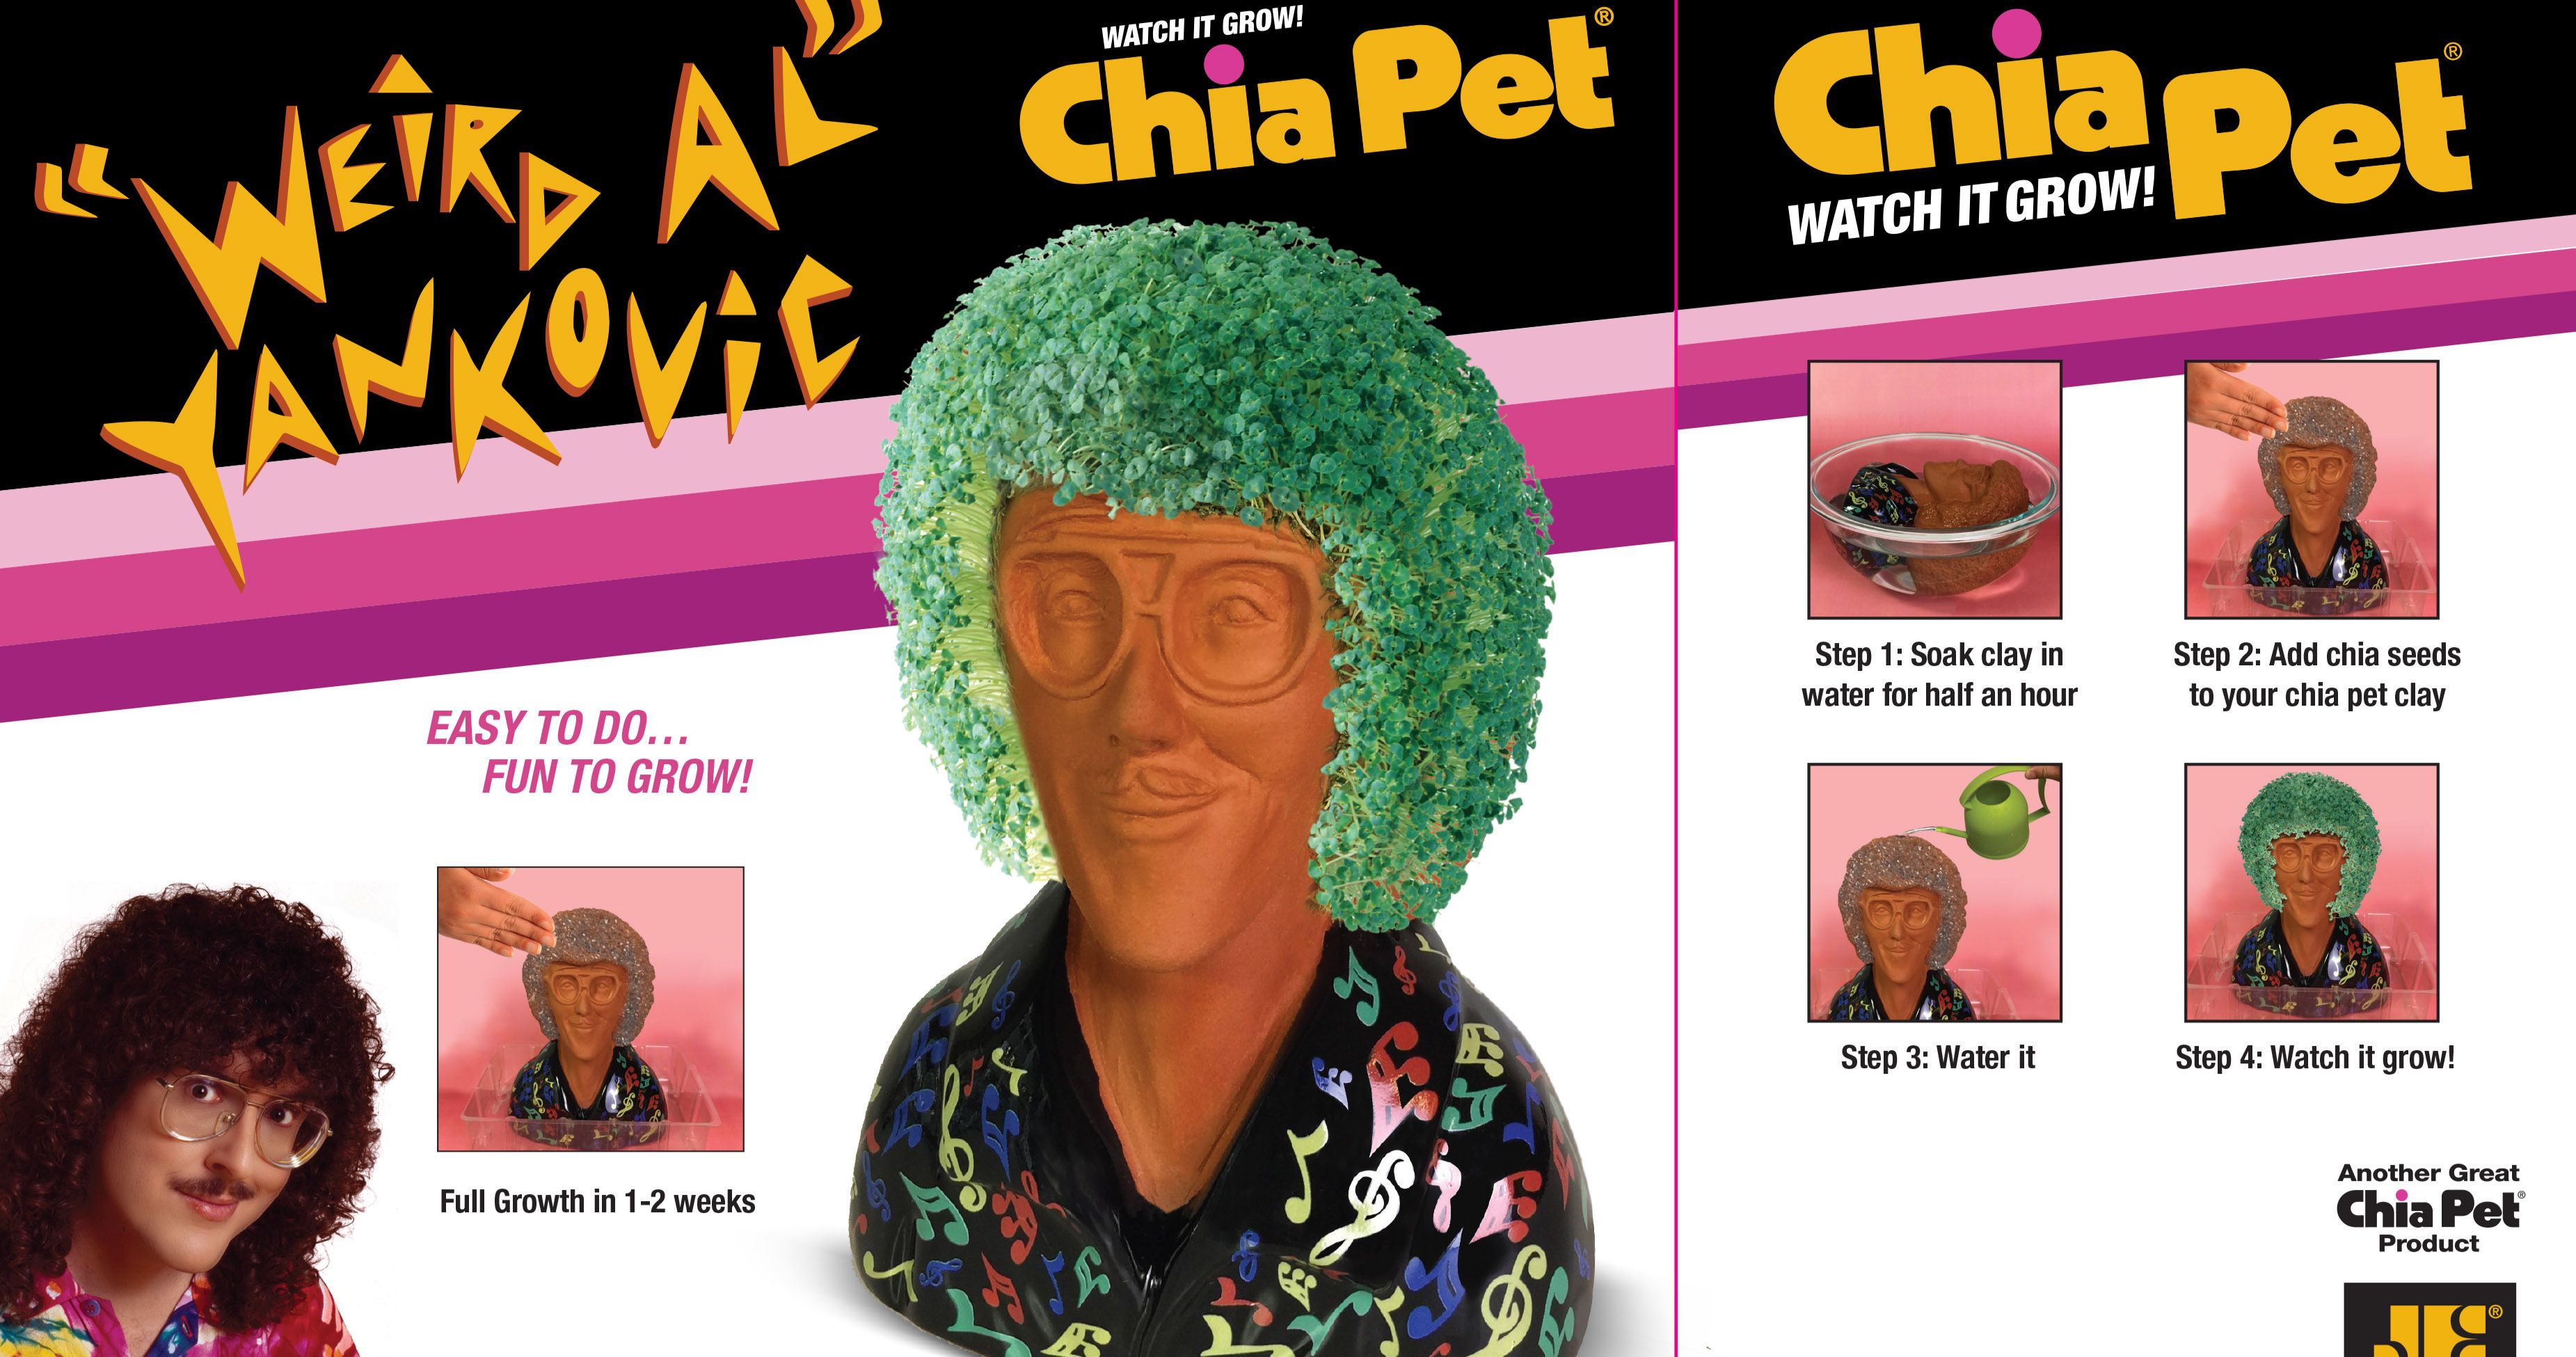 Weird Al Yankovic Chia Pet Arrives, Changing In-Home Gardening Forever